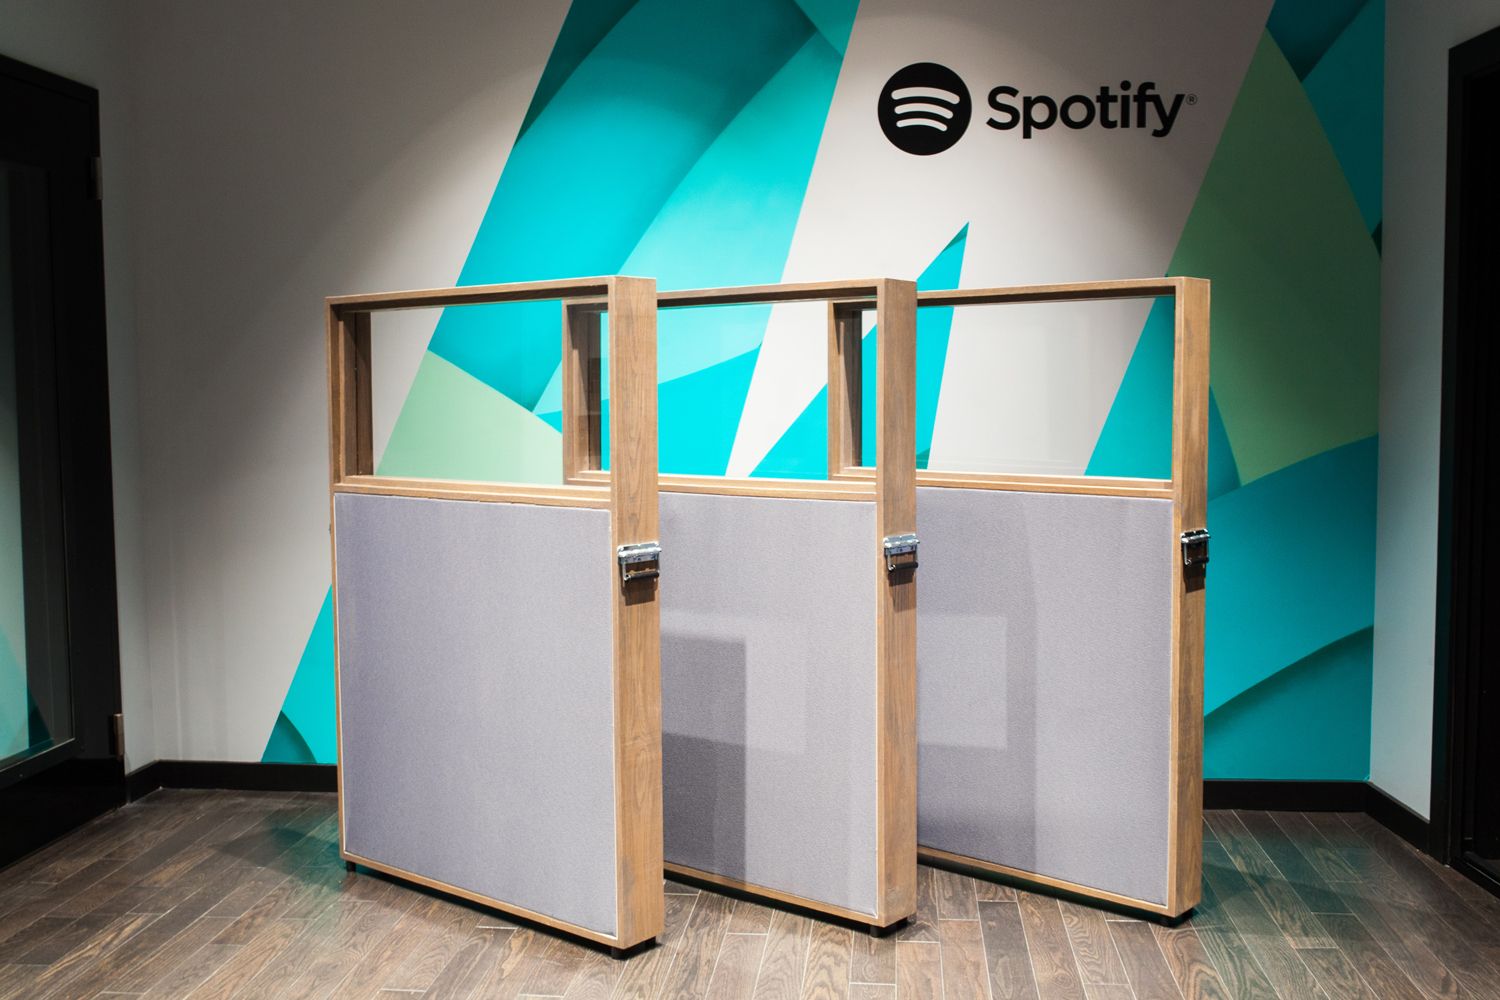 Acoustic Movable Panels for Spotify